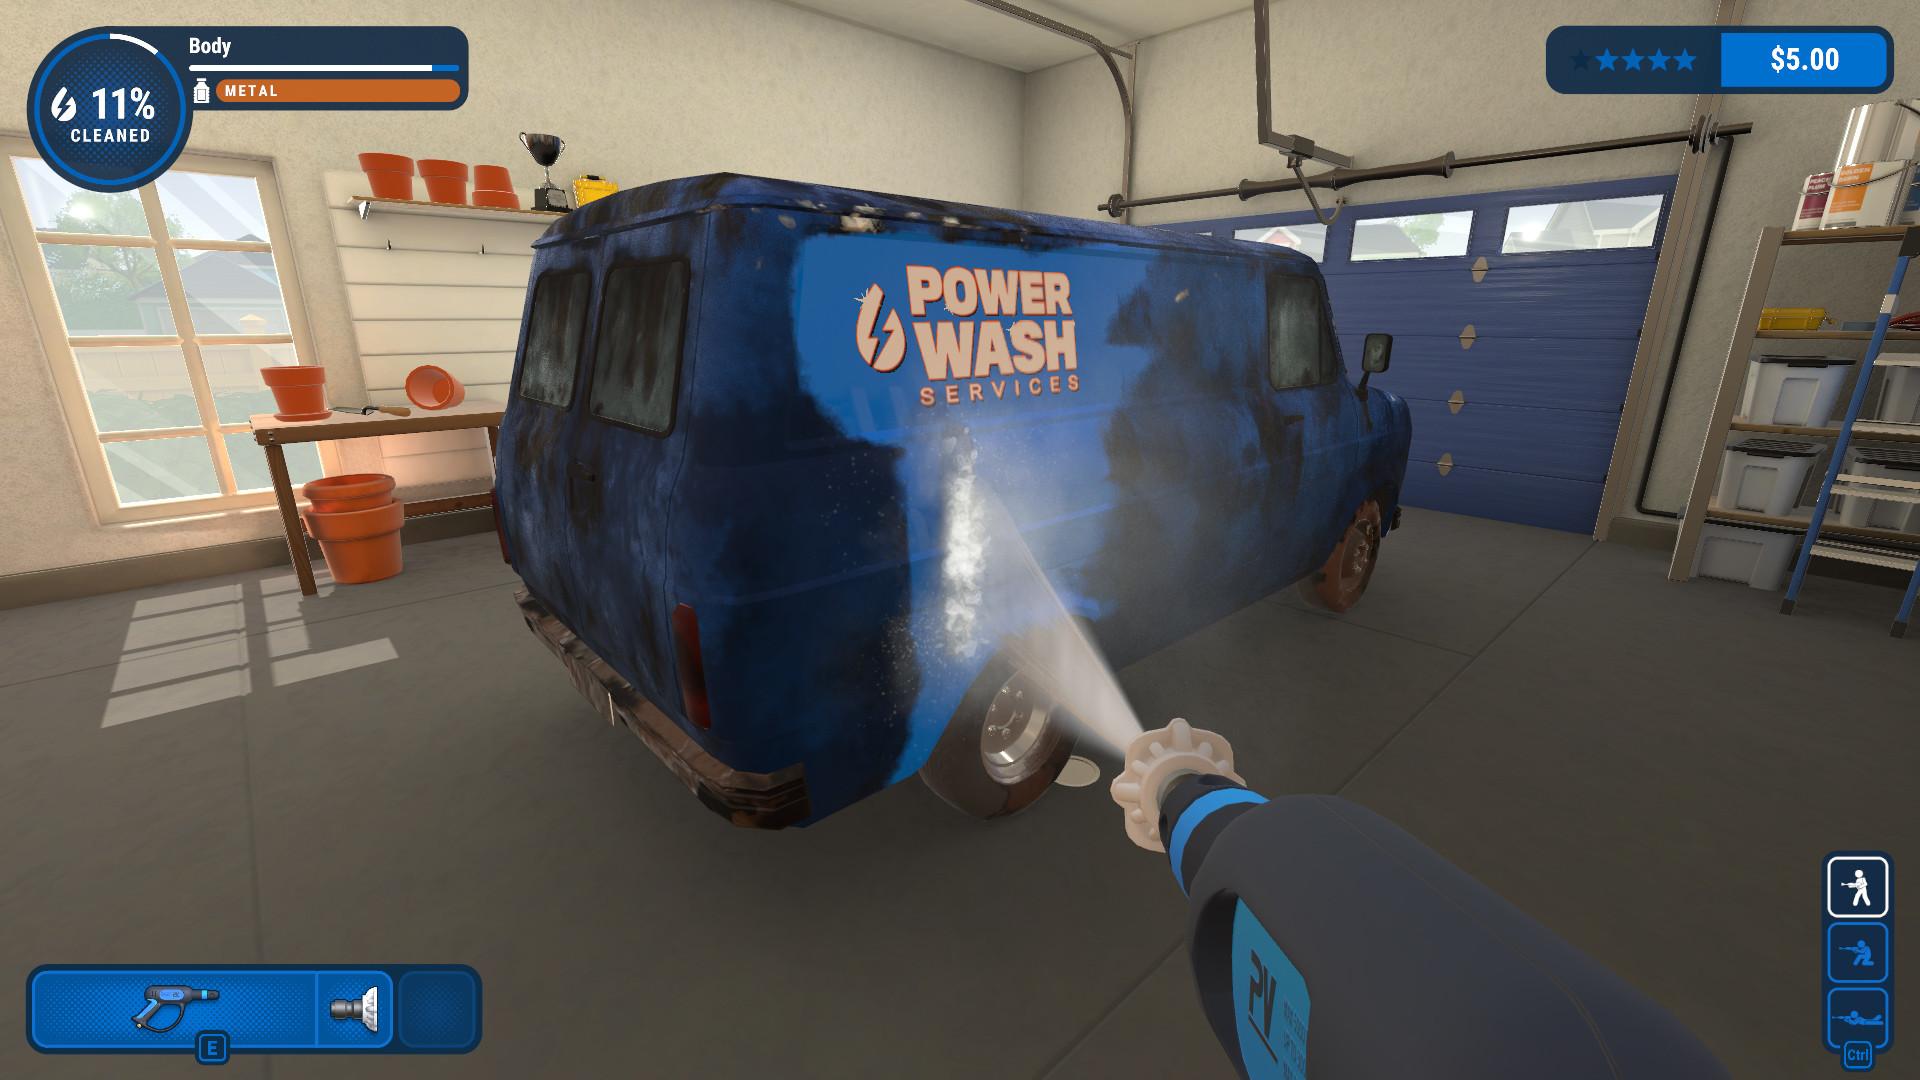 PowerWash Simulator Coop Multiplayer: How To Play With Friends